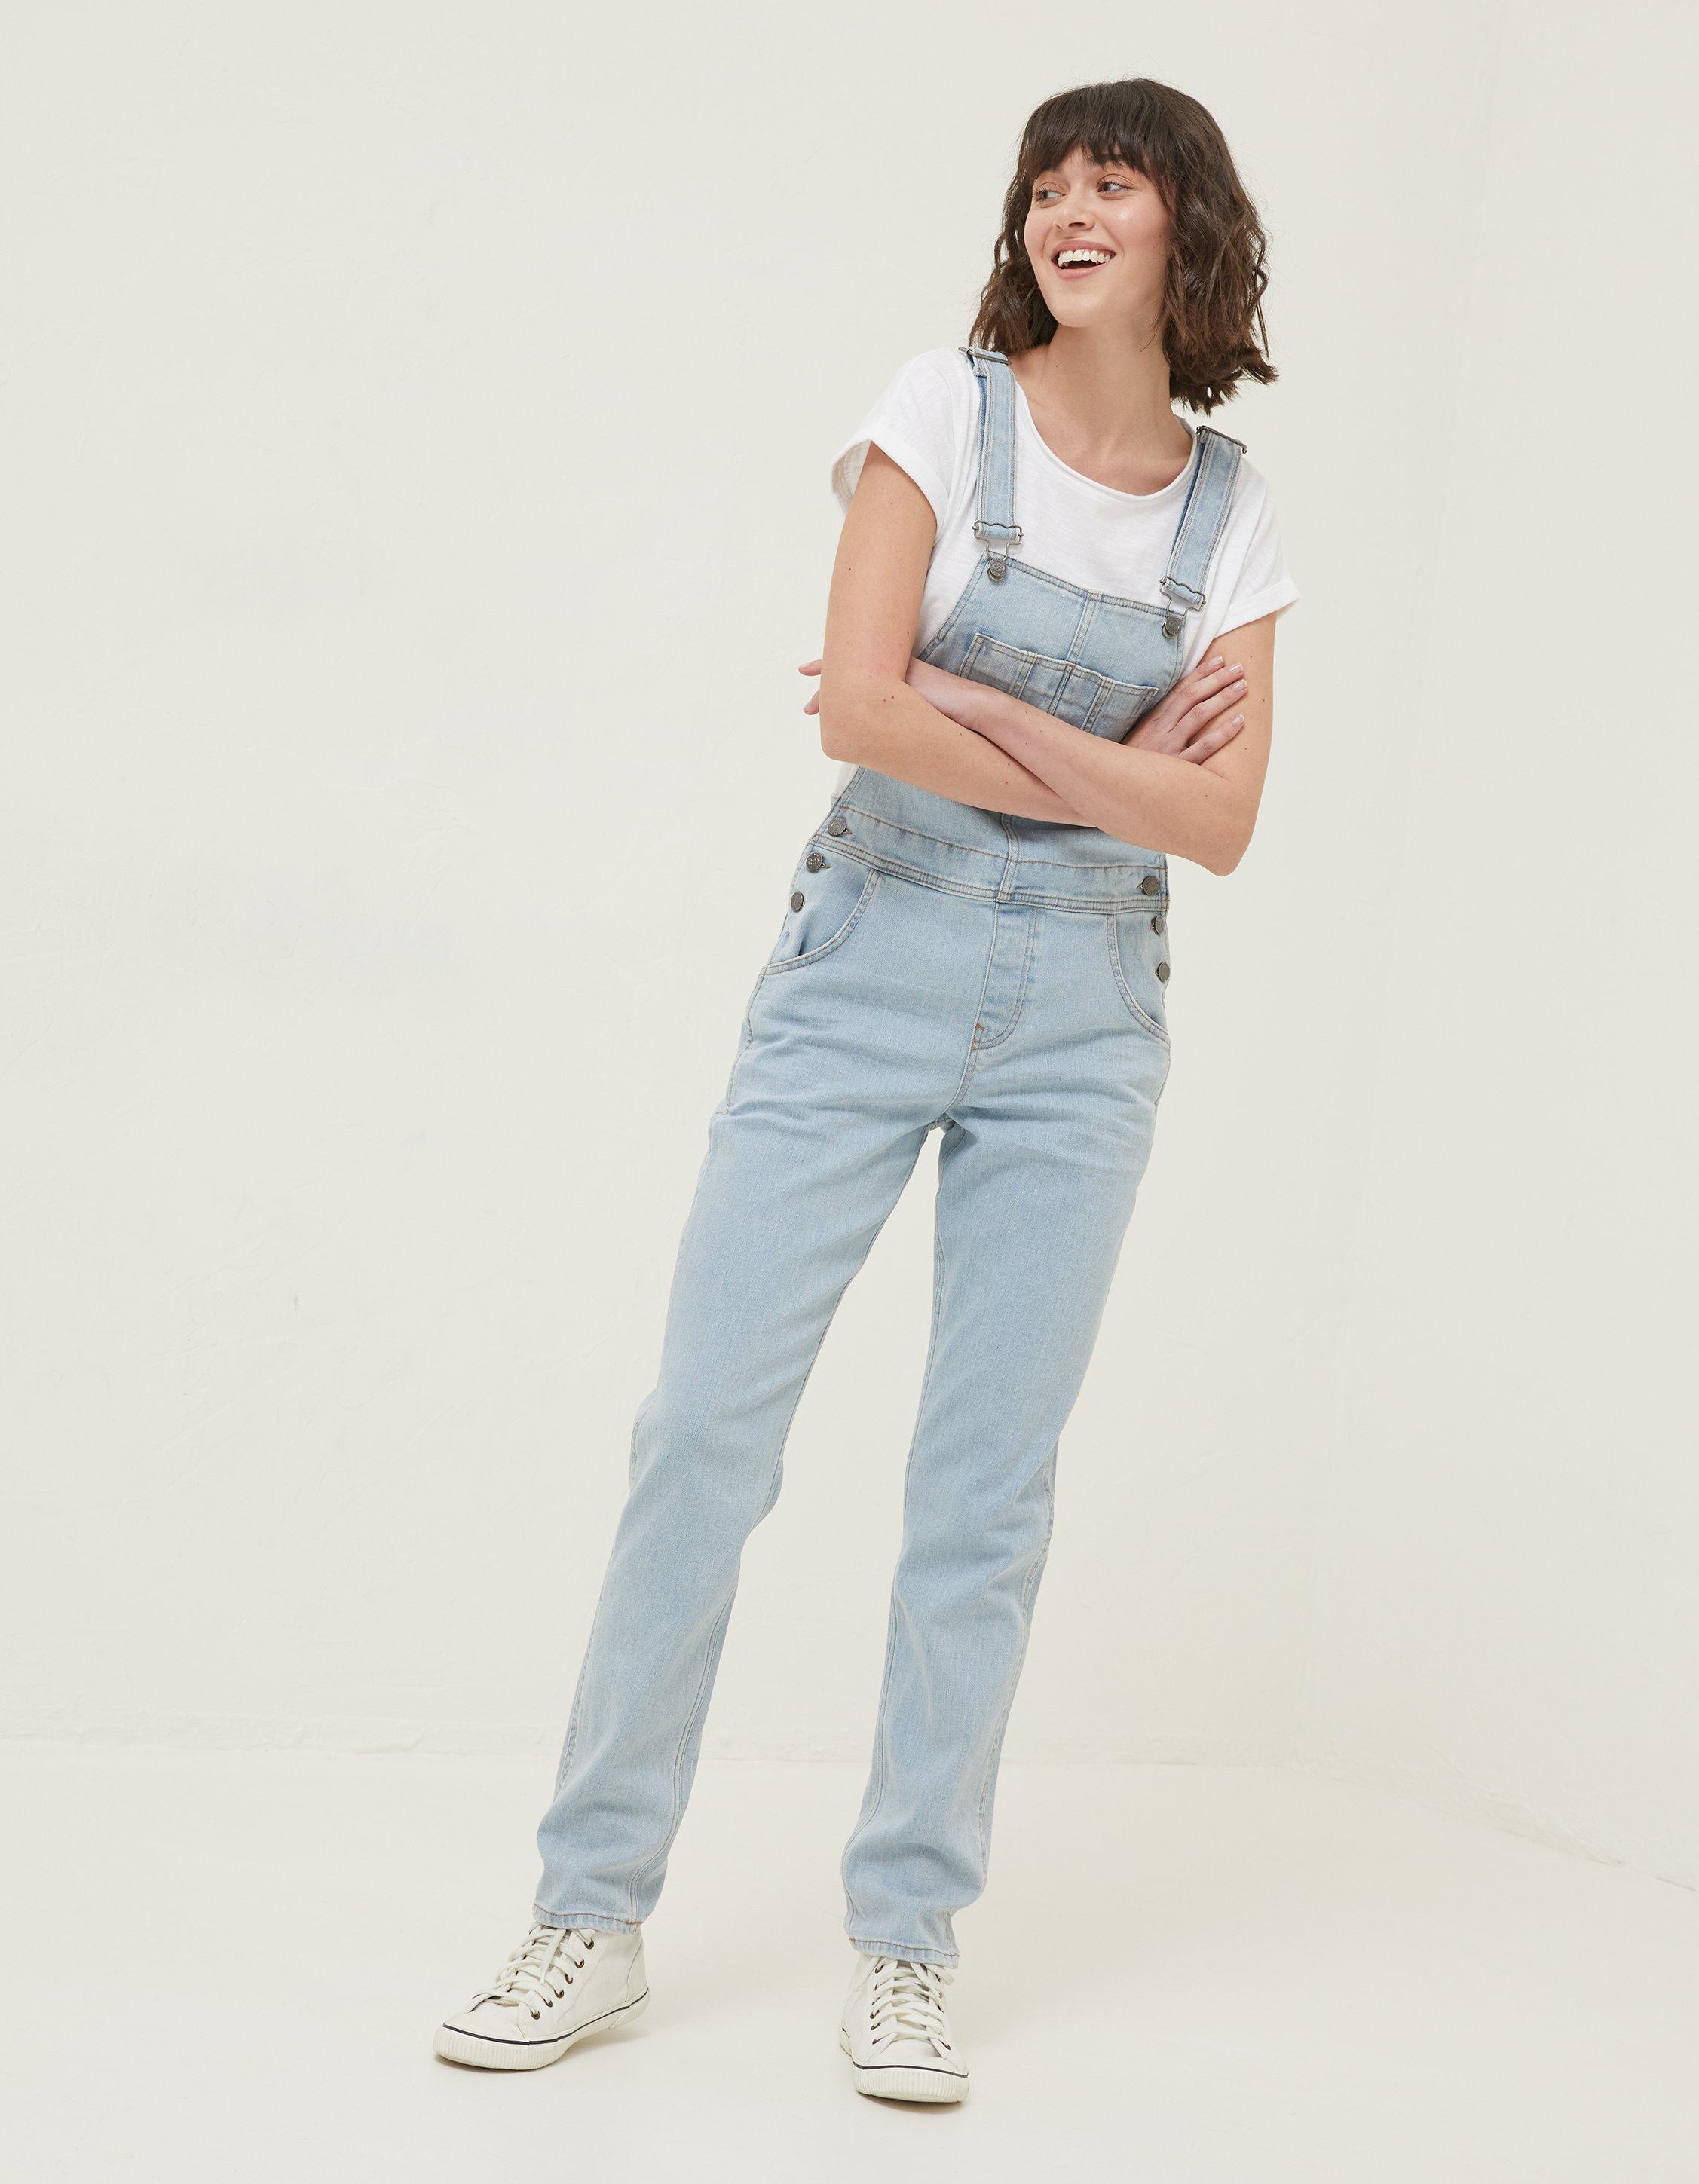 Dungaree USA Jumpsuits & Playsuits for Women for sale